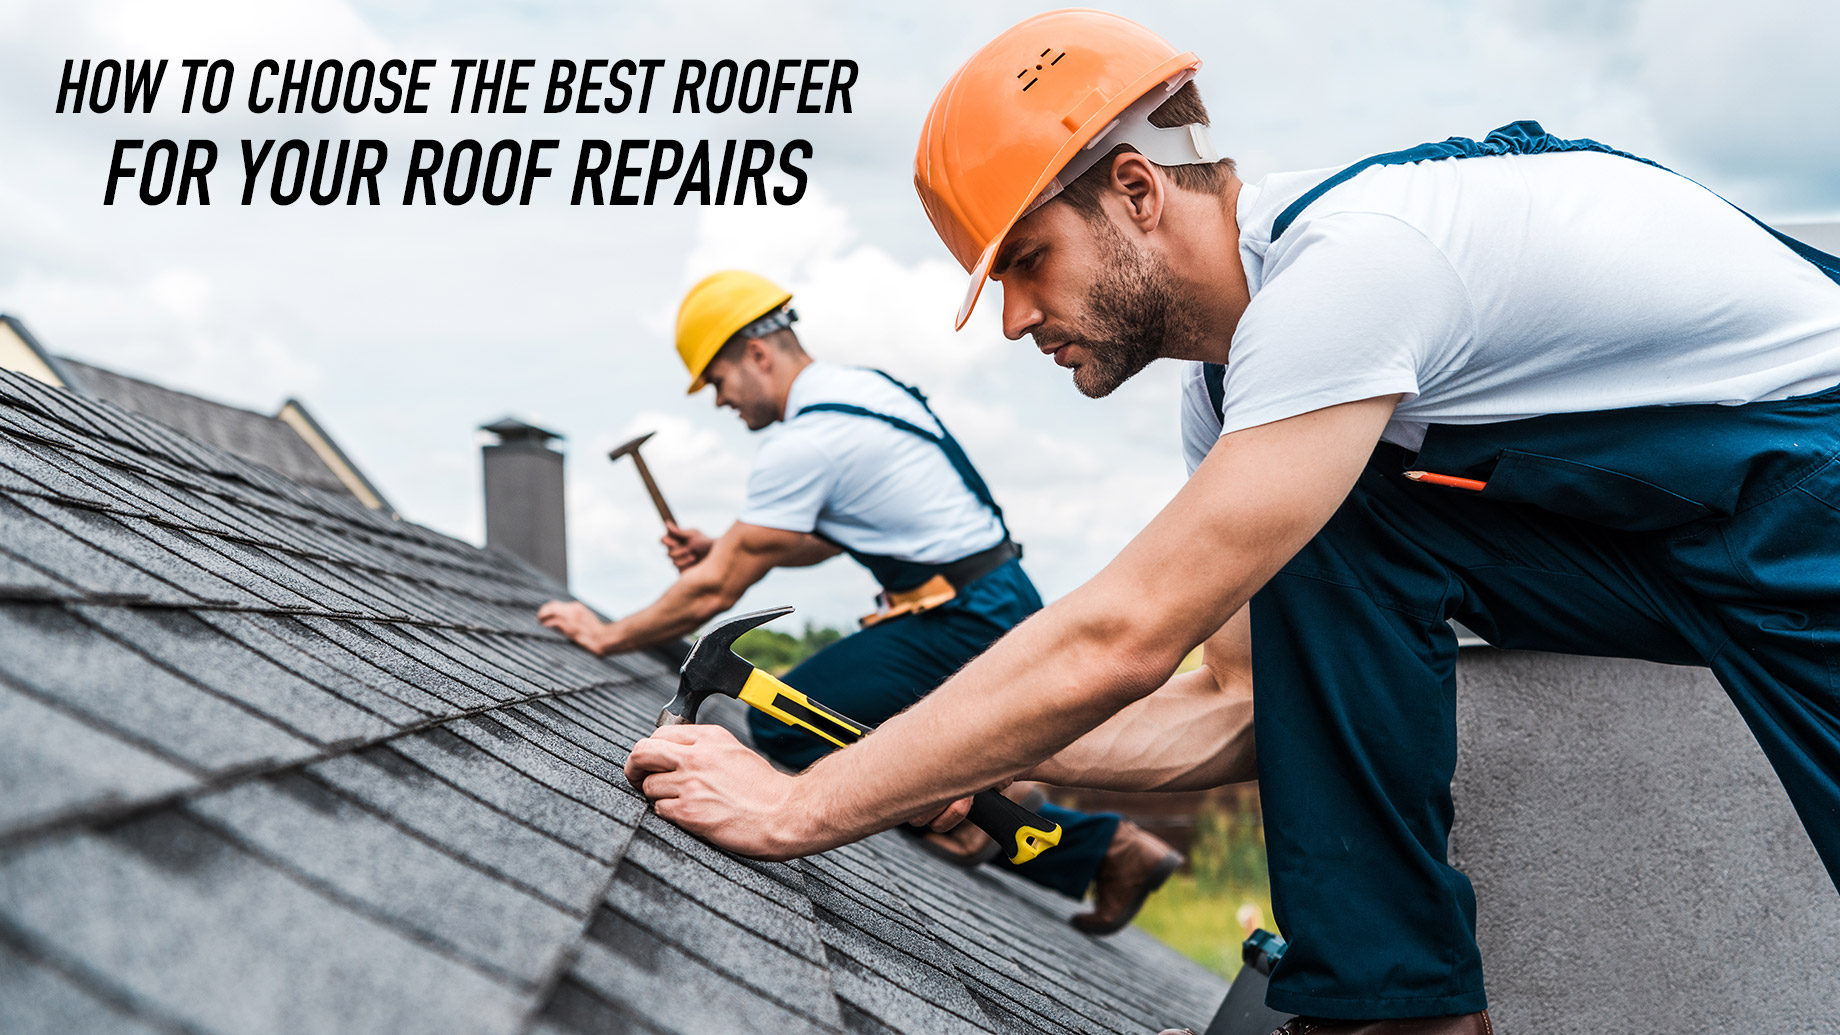 How To Choose The Best Roofer For Your Roof Repairs The Pinnacle List